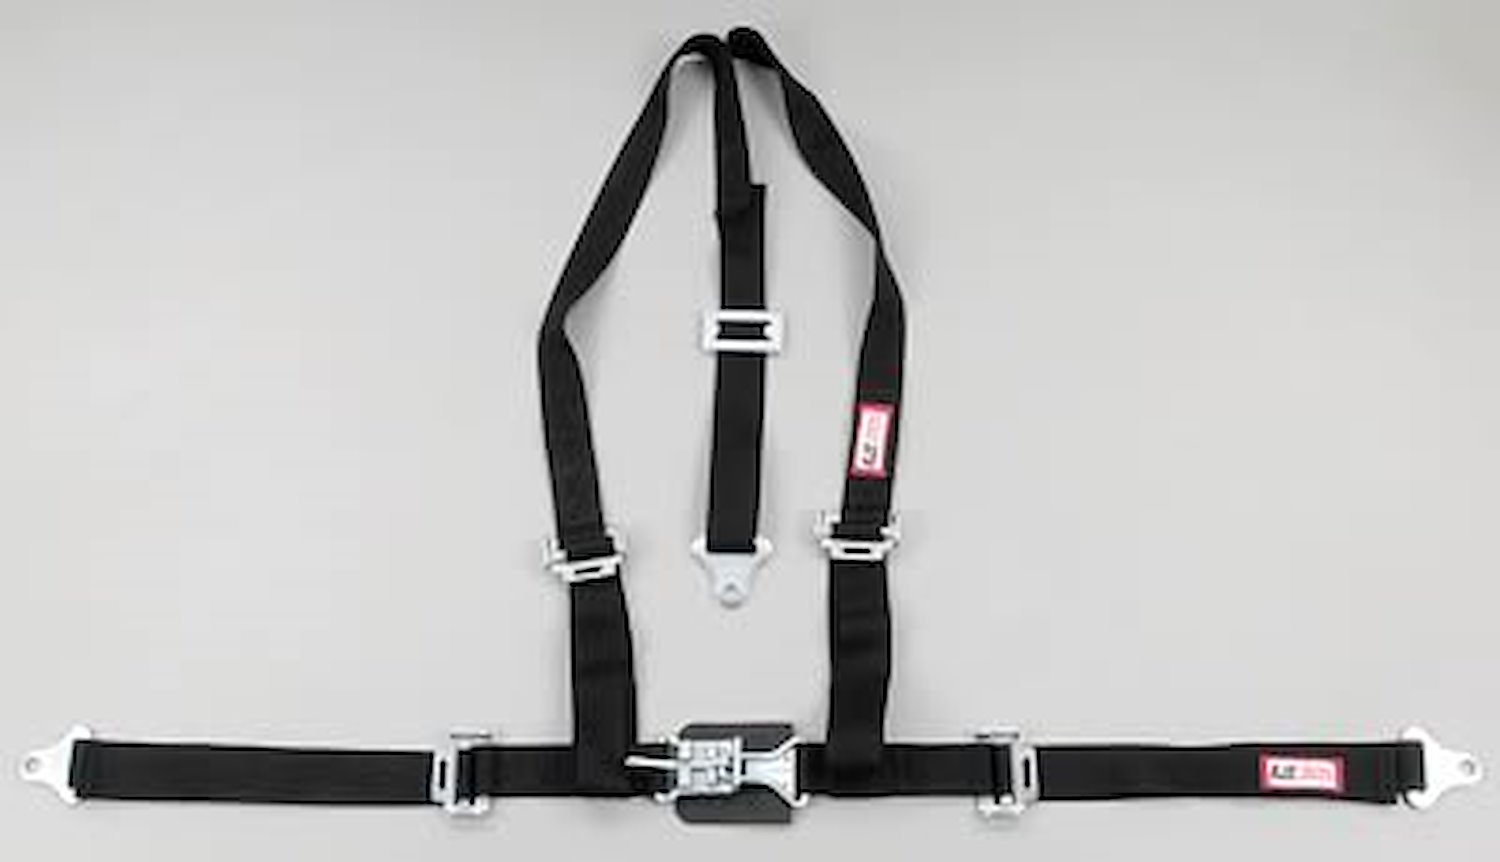 NON-SFI L&L HARNESS 3 PULL UP Lap BELT SEWN IN 2 S.H. Y FLOOR Mount ALL WRAP ENDS BLUE